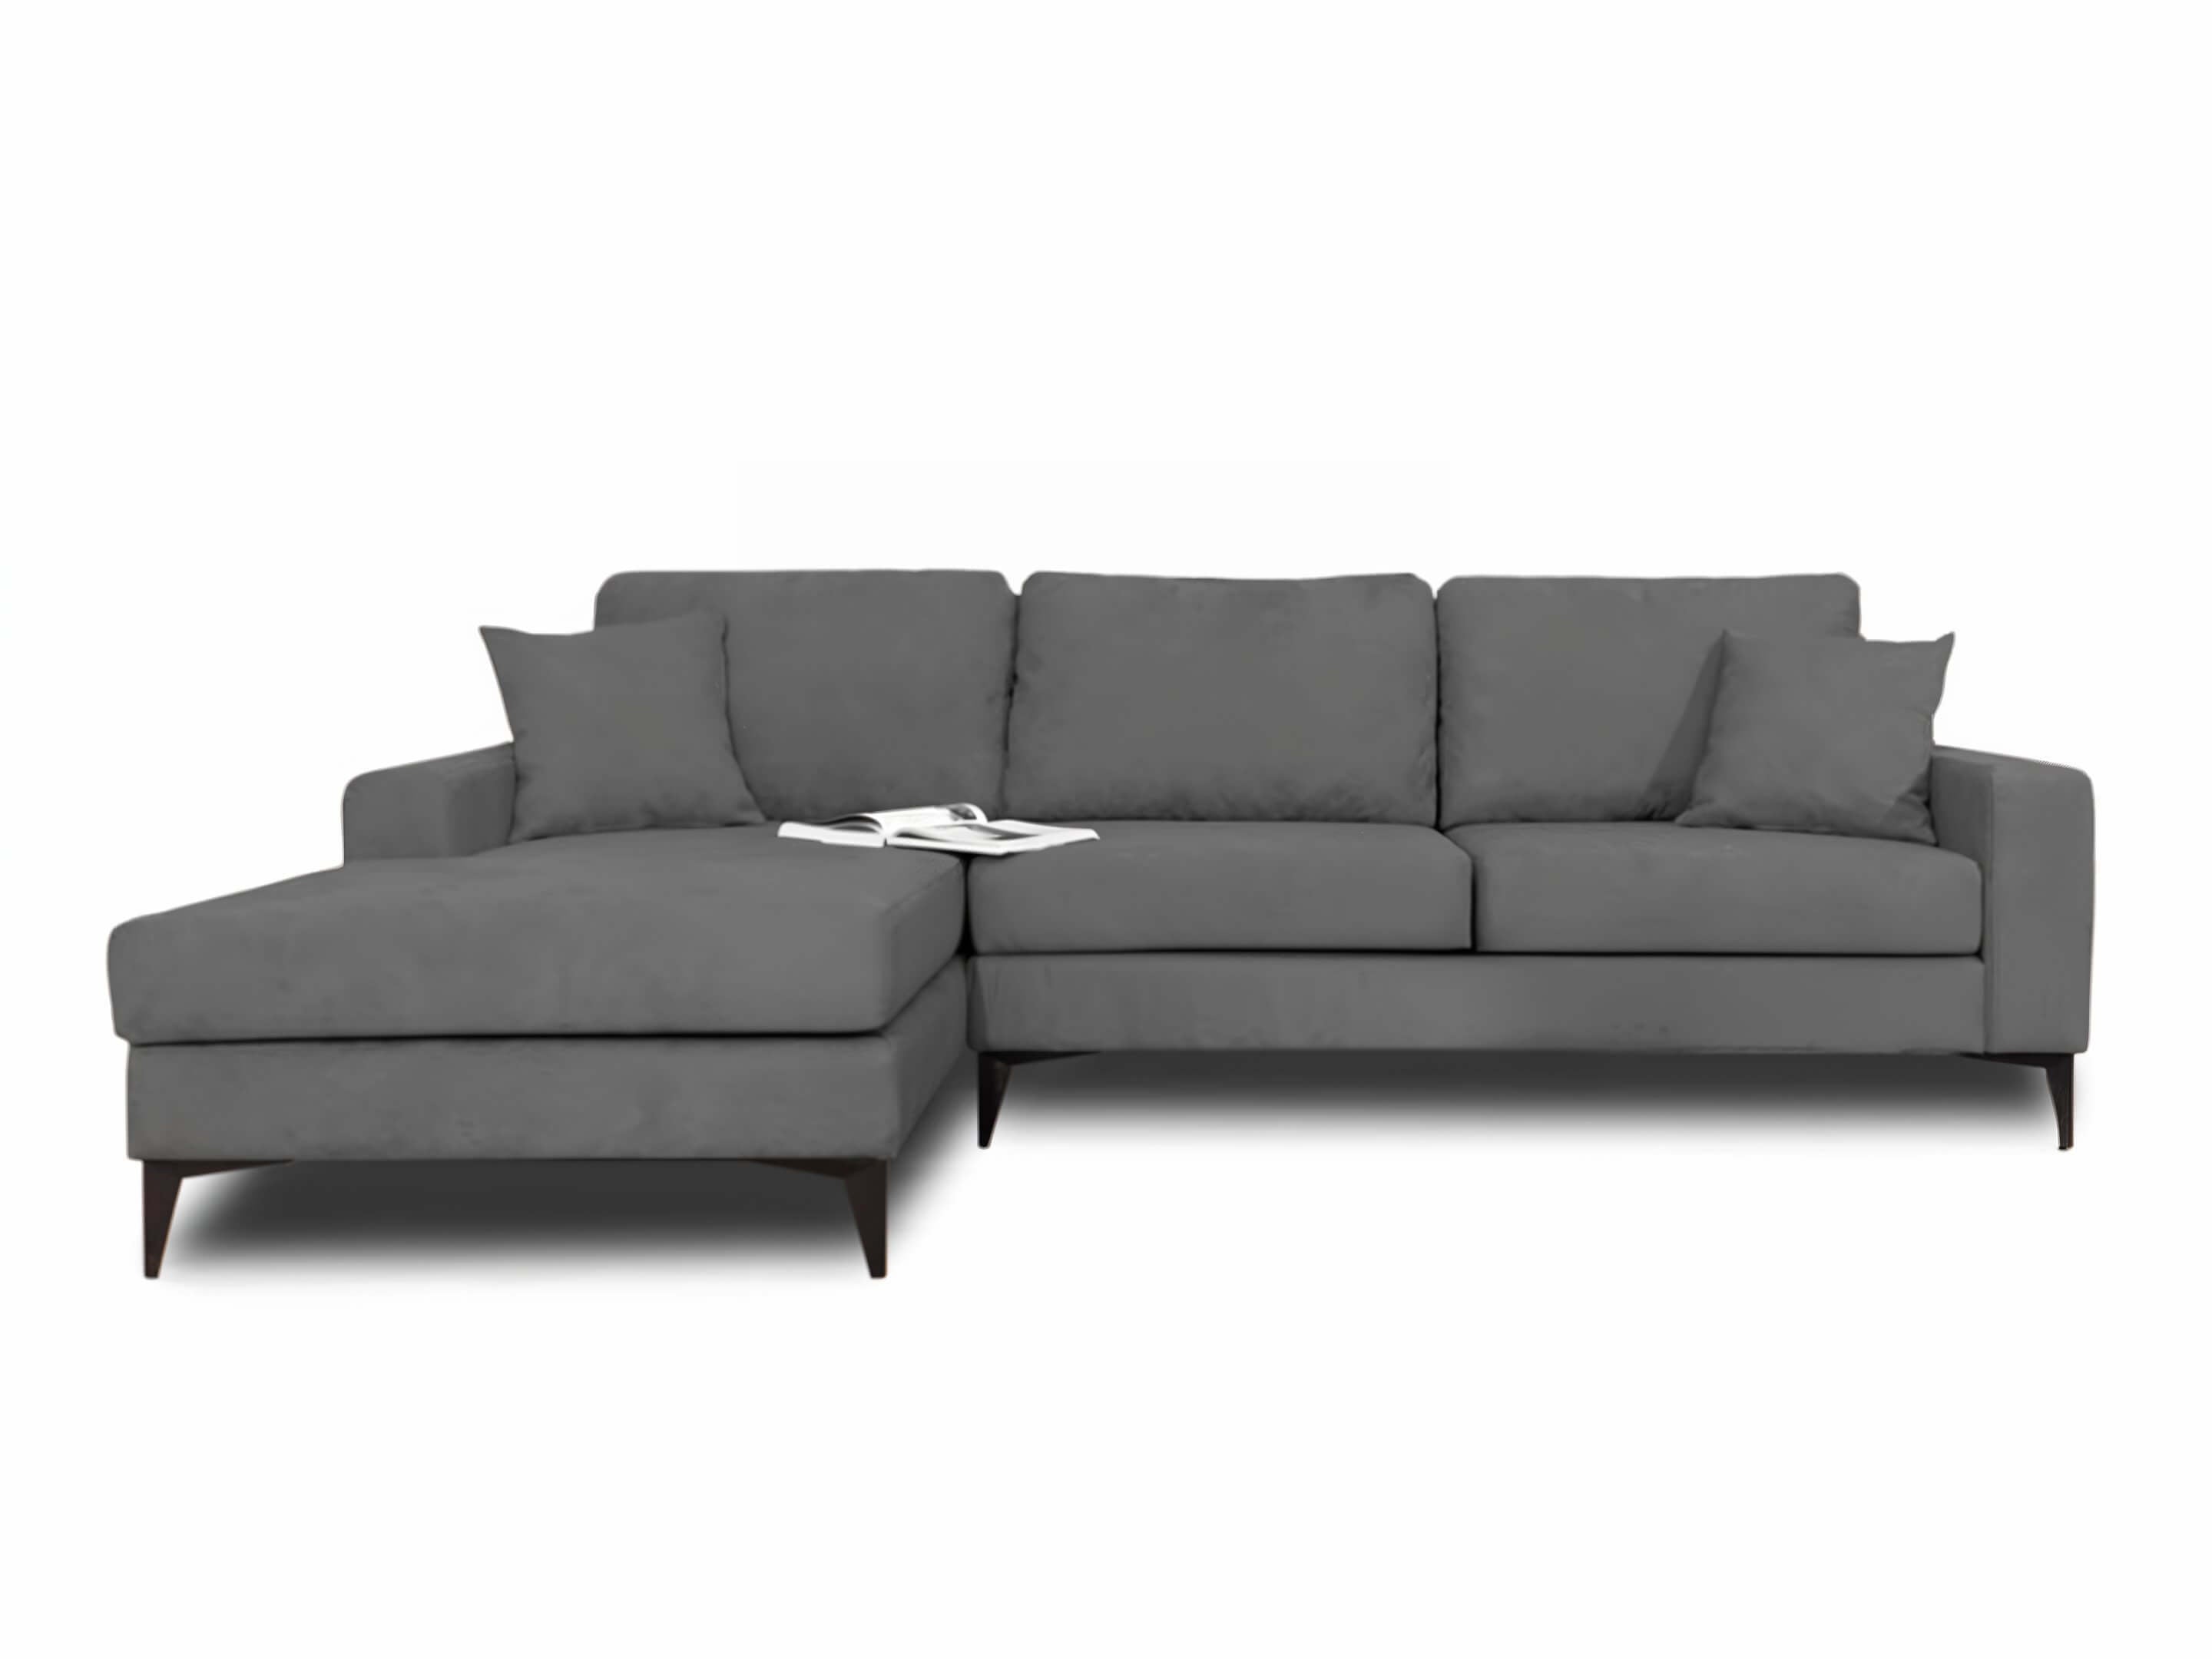 star corner sofa water and stain resistant fabric - Lux furniture